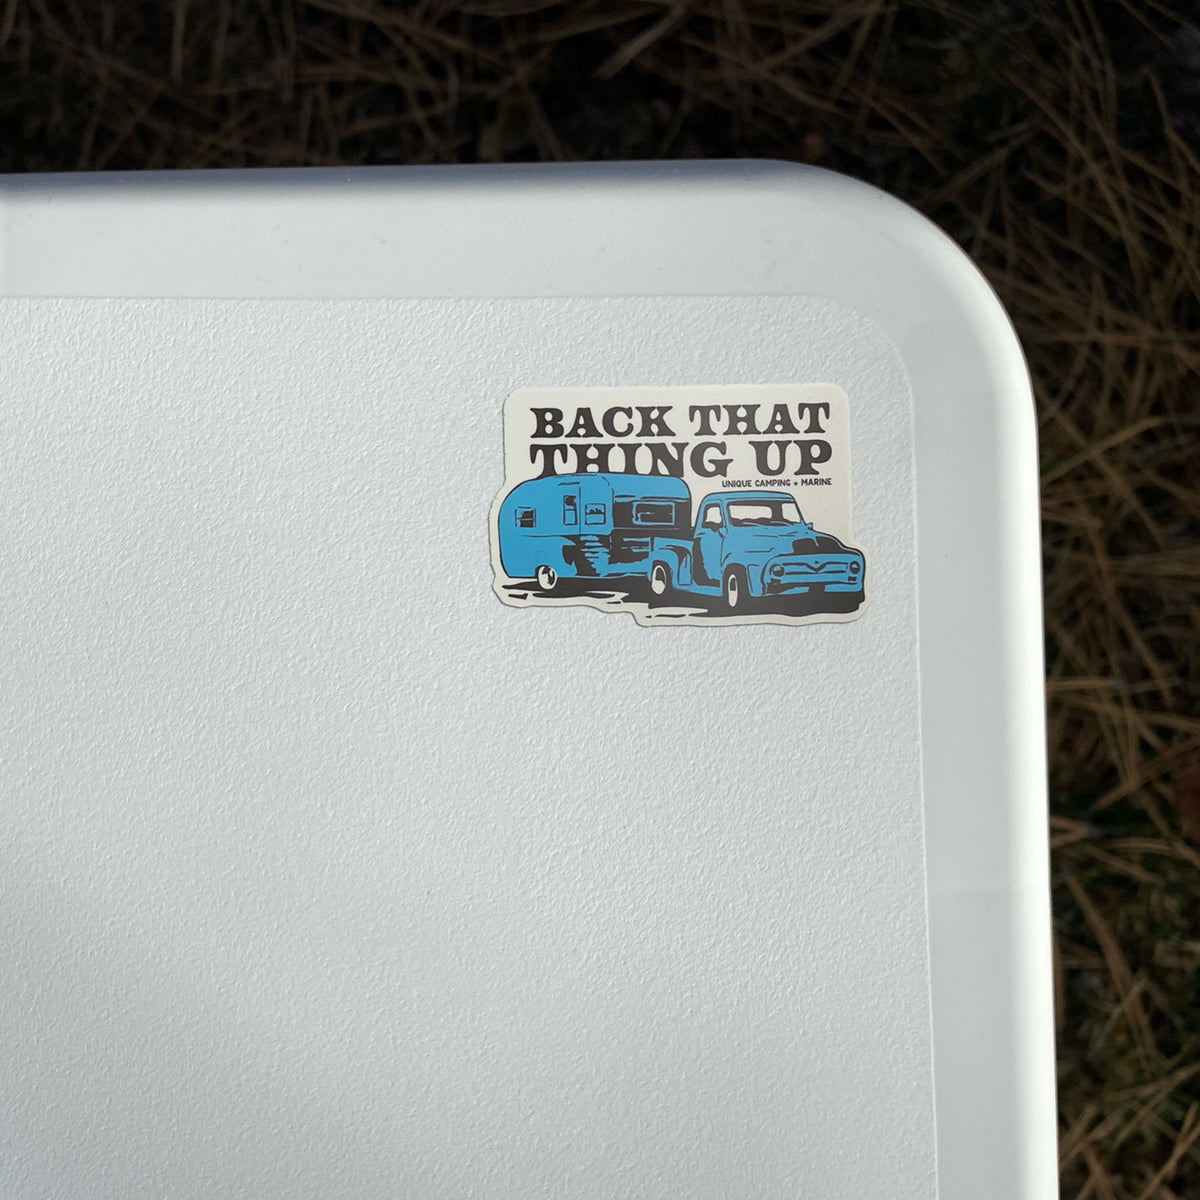 Back that thing up sticker on a cooler. Unique Camping + Marine